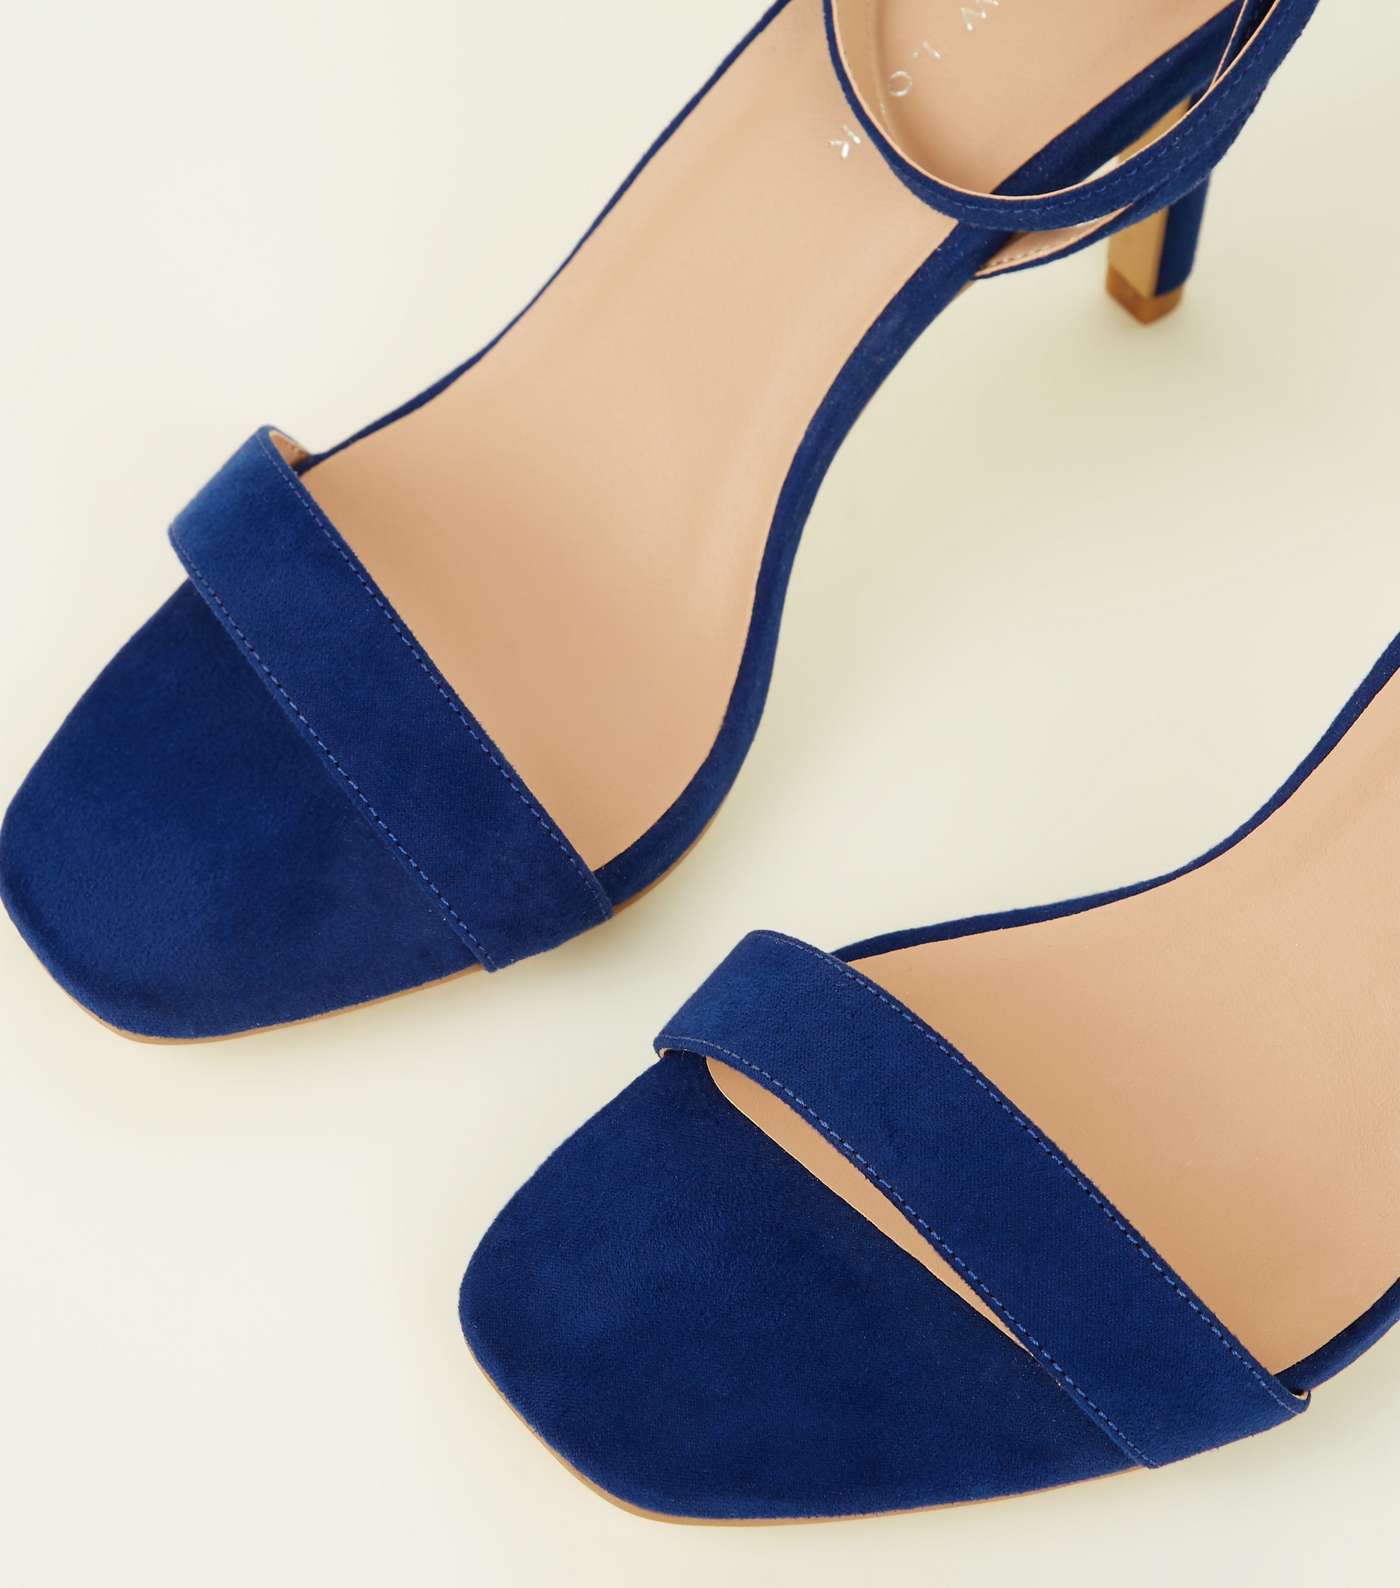 Wide Fit Blue Suedette Strappy Square Toe Heels Image 3